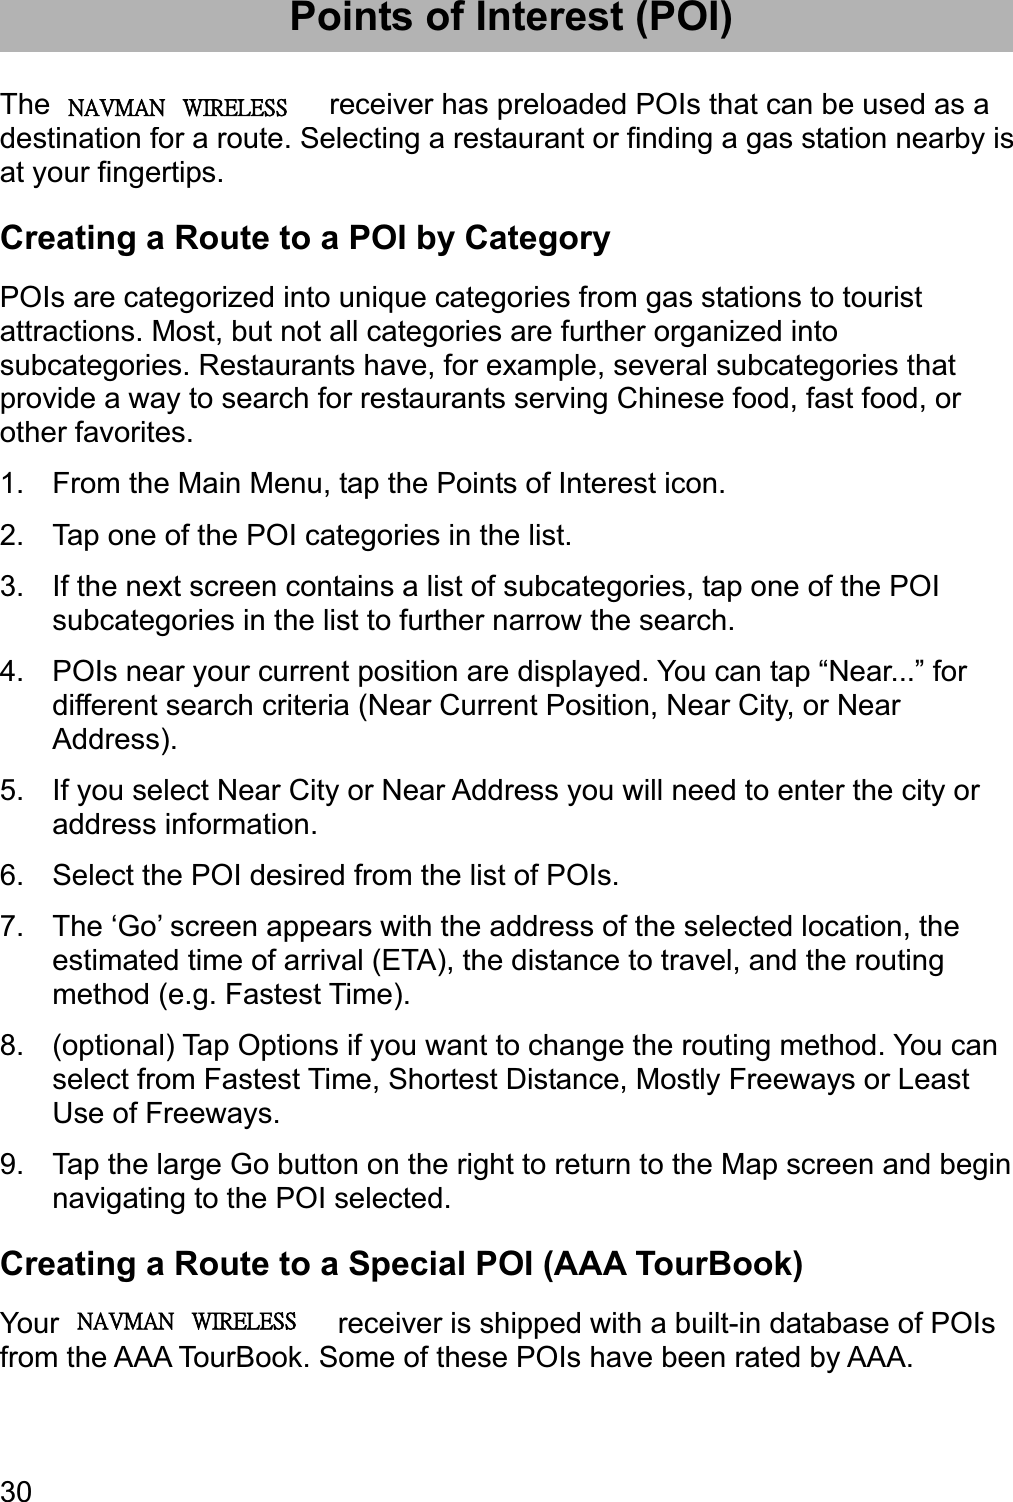 30Points of Interest (POI) The Magellan RoadMate receiver has preloaded POIs that can be used as a destination for a route. Selecting a restaurant or finding a gas station nearby is at your fingertips. Creating a Route to a POI by Category POIs are categorized into unique categories from gas stations to tourist attractions. Most, but not all categories are further organized into subcategories. Restaurants have, for example, several subcategories that provide a way to search for restaurants serving Chinese food, fast food, or other favorites. 1.  From the Main Menu, tap the Points of Interest icon. 2.  Tap one of the POI categories in the list. 3.  If the next screen contains a list of subcategories, tap one of the POI subcategories in the list to further narrow the search. 4.  POIs near your current position are displayed. You can tap “Near...” for different search criteria (Near Current Position, Near City, or Near Address). 5.  If you select Near City or Near Address you will need to enter the city or address information. 6.  Select the POI desired from the list of POIs. 7.  The ‘Go’ screen appears with the address of the selected location, the estimated time of arrival (ETA), the distance to travel, and the routing method (e.g. Fastest Time). 8.  (optional) Tap Options if you want to change the routing method. You can select from Fastest Time, Shortest Distance, Mostly Freeways or Least Use of Freeways. 9.  Tap the large Go button on the right to return to the Map screen and begin navigating to the POI selected. Creating a Route to a Special POI (AAA TourBook) Your Magellan RoadMate receiver is shipped with a built-in database of POIs from the AAA TourBook. Some of these POIs have been rated by AAA. ʳʳˡ˔˩ˠ˔ˡʳʳʳ˪˜˥˘˟˘˦˦ʳʳˡ˔˩ˠ˔ˡʳʳʳ˪˜˥˘˟˘˦˦